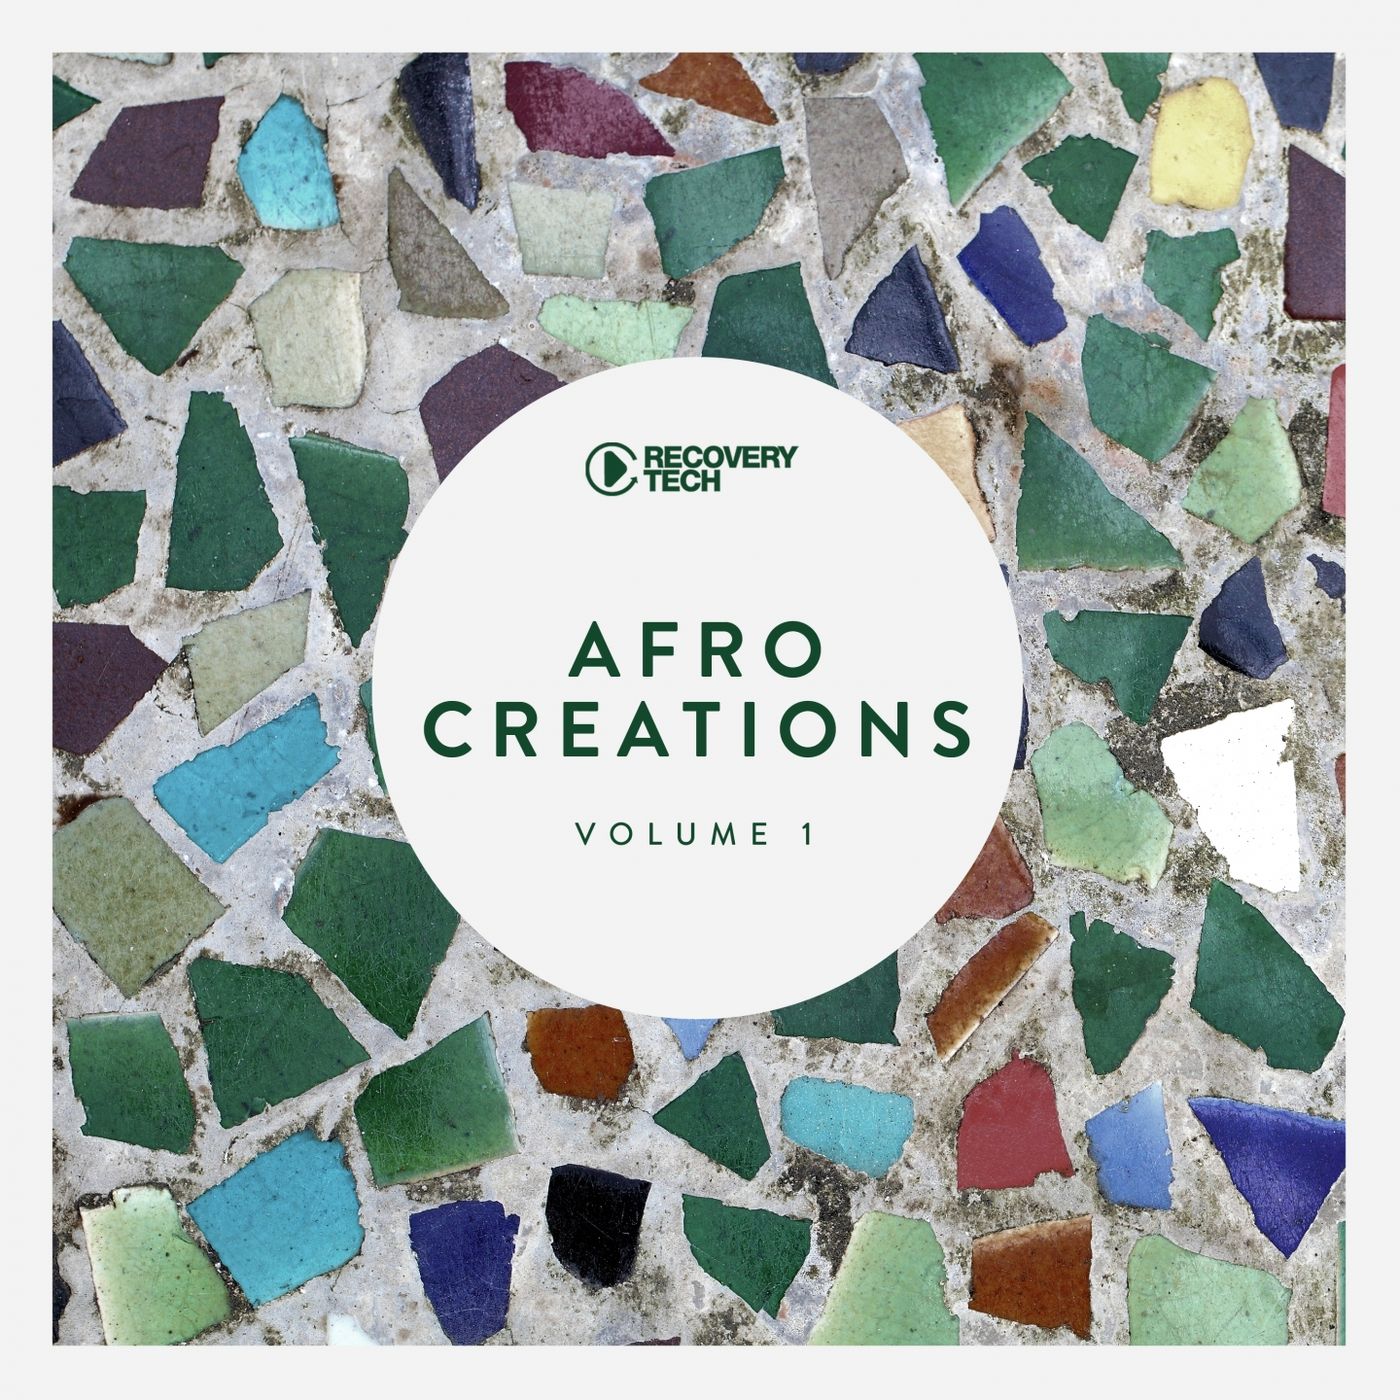 VA - Afro Creations, Vol. 1 / Recovery Tech